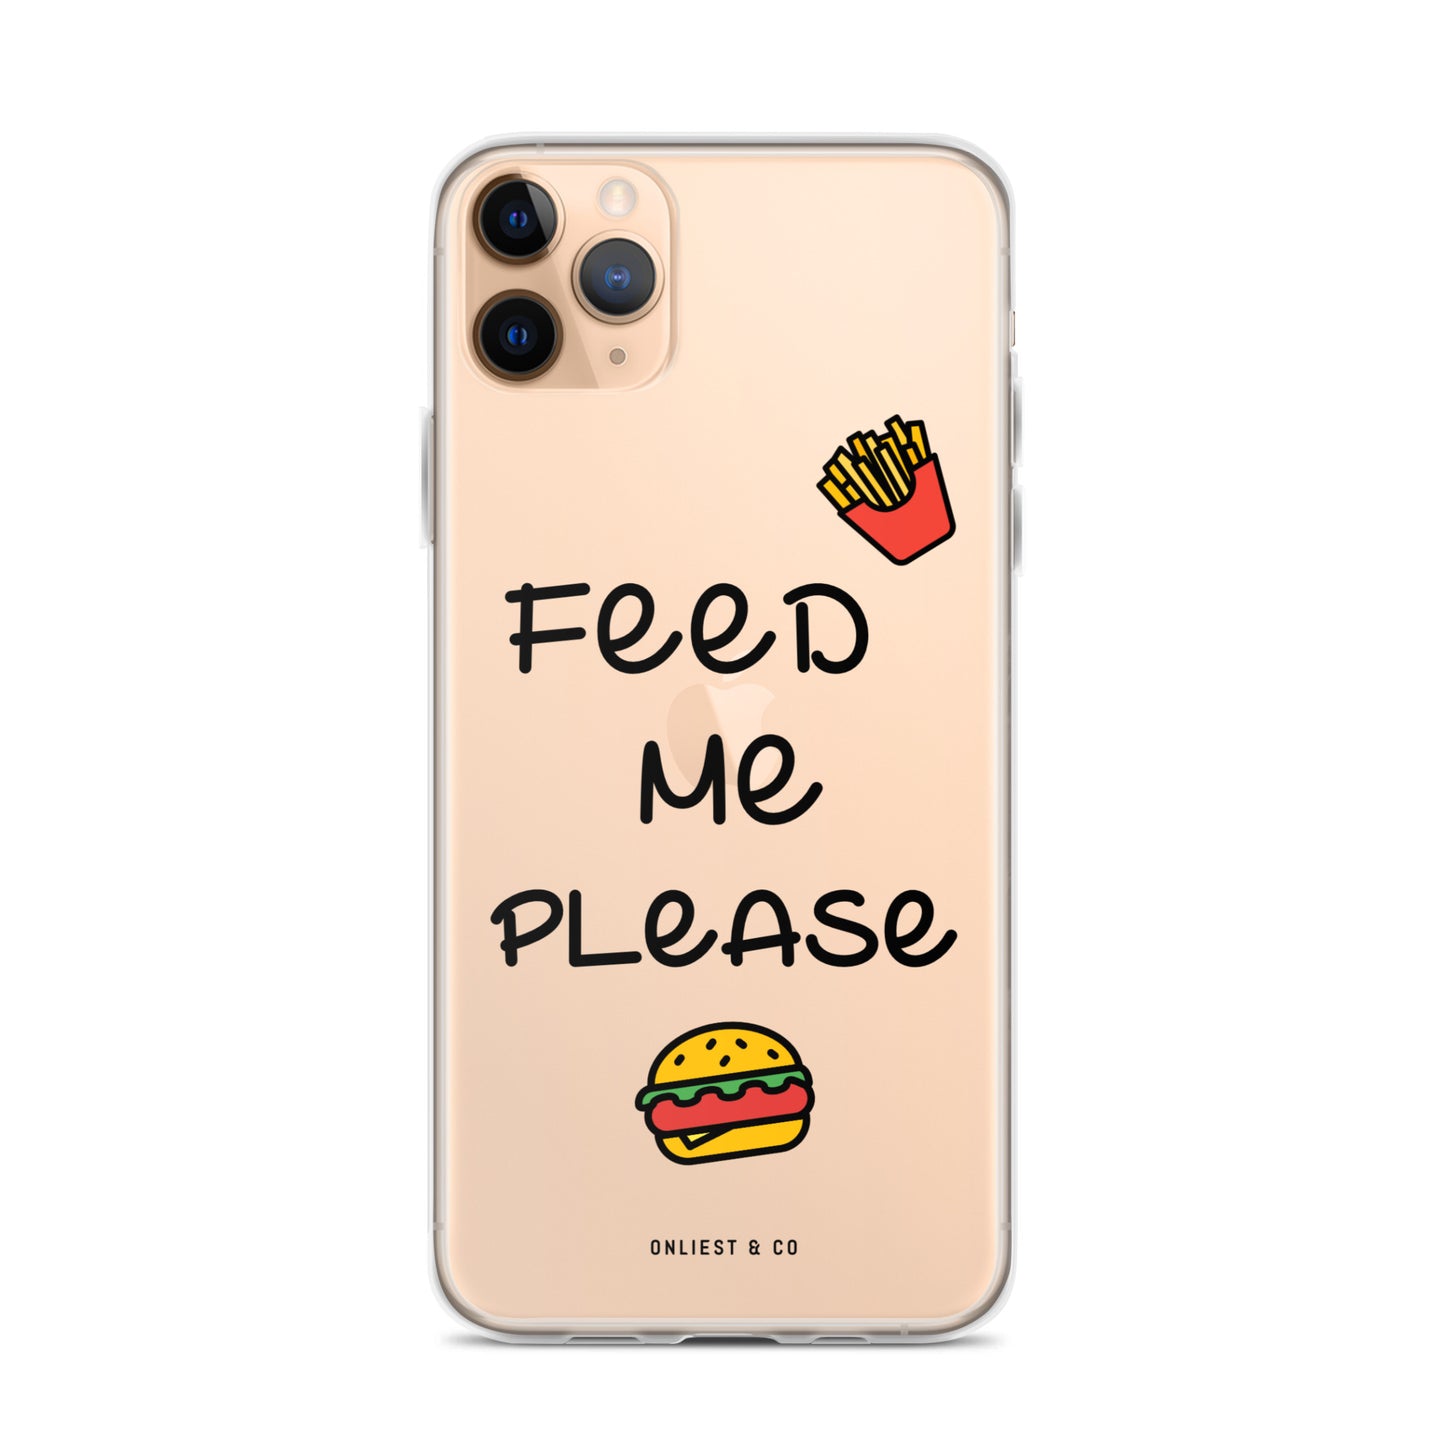 FEED ME Color Case